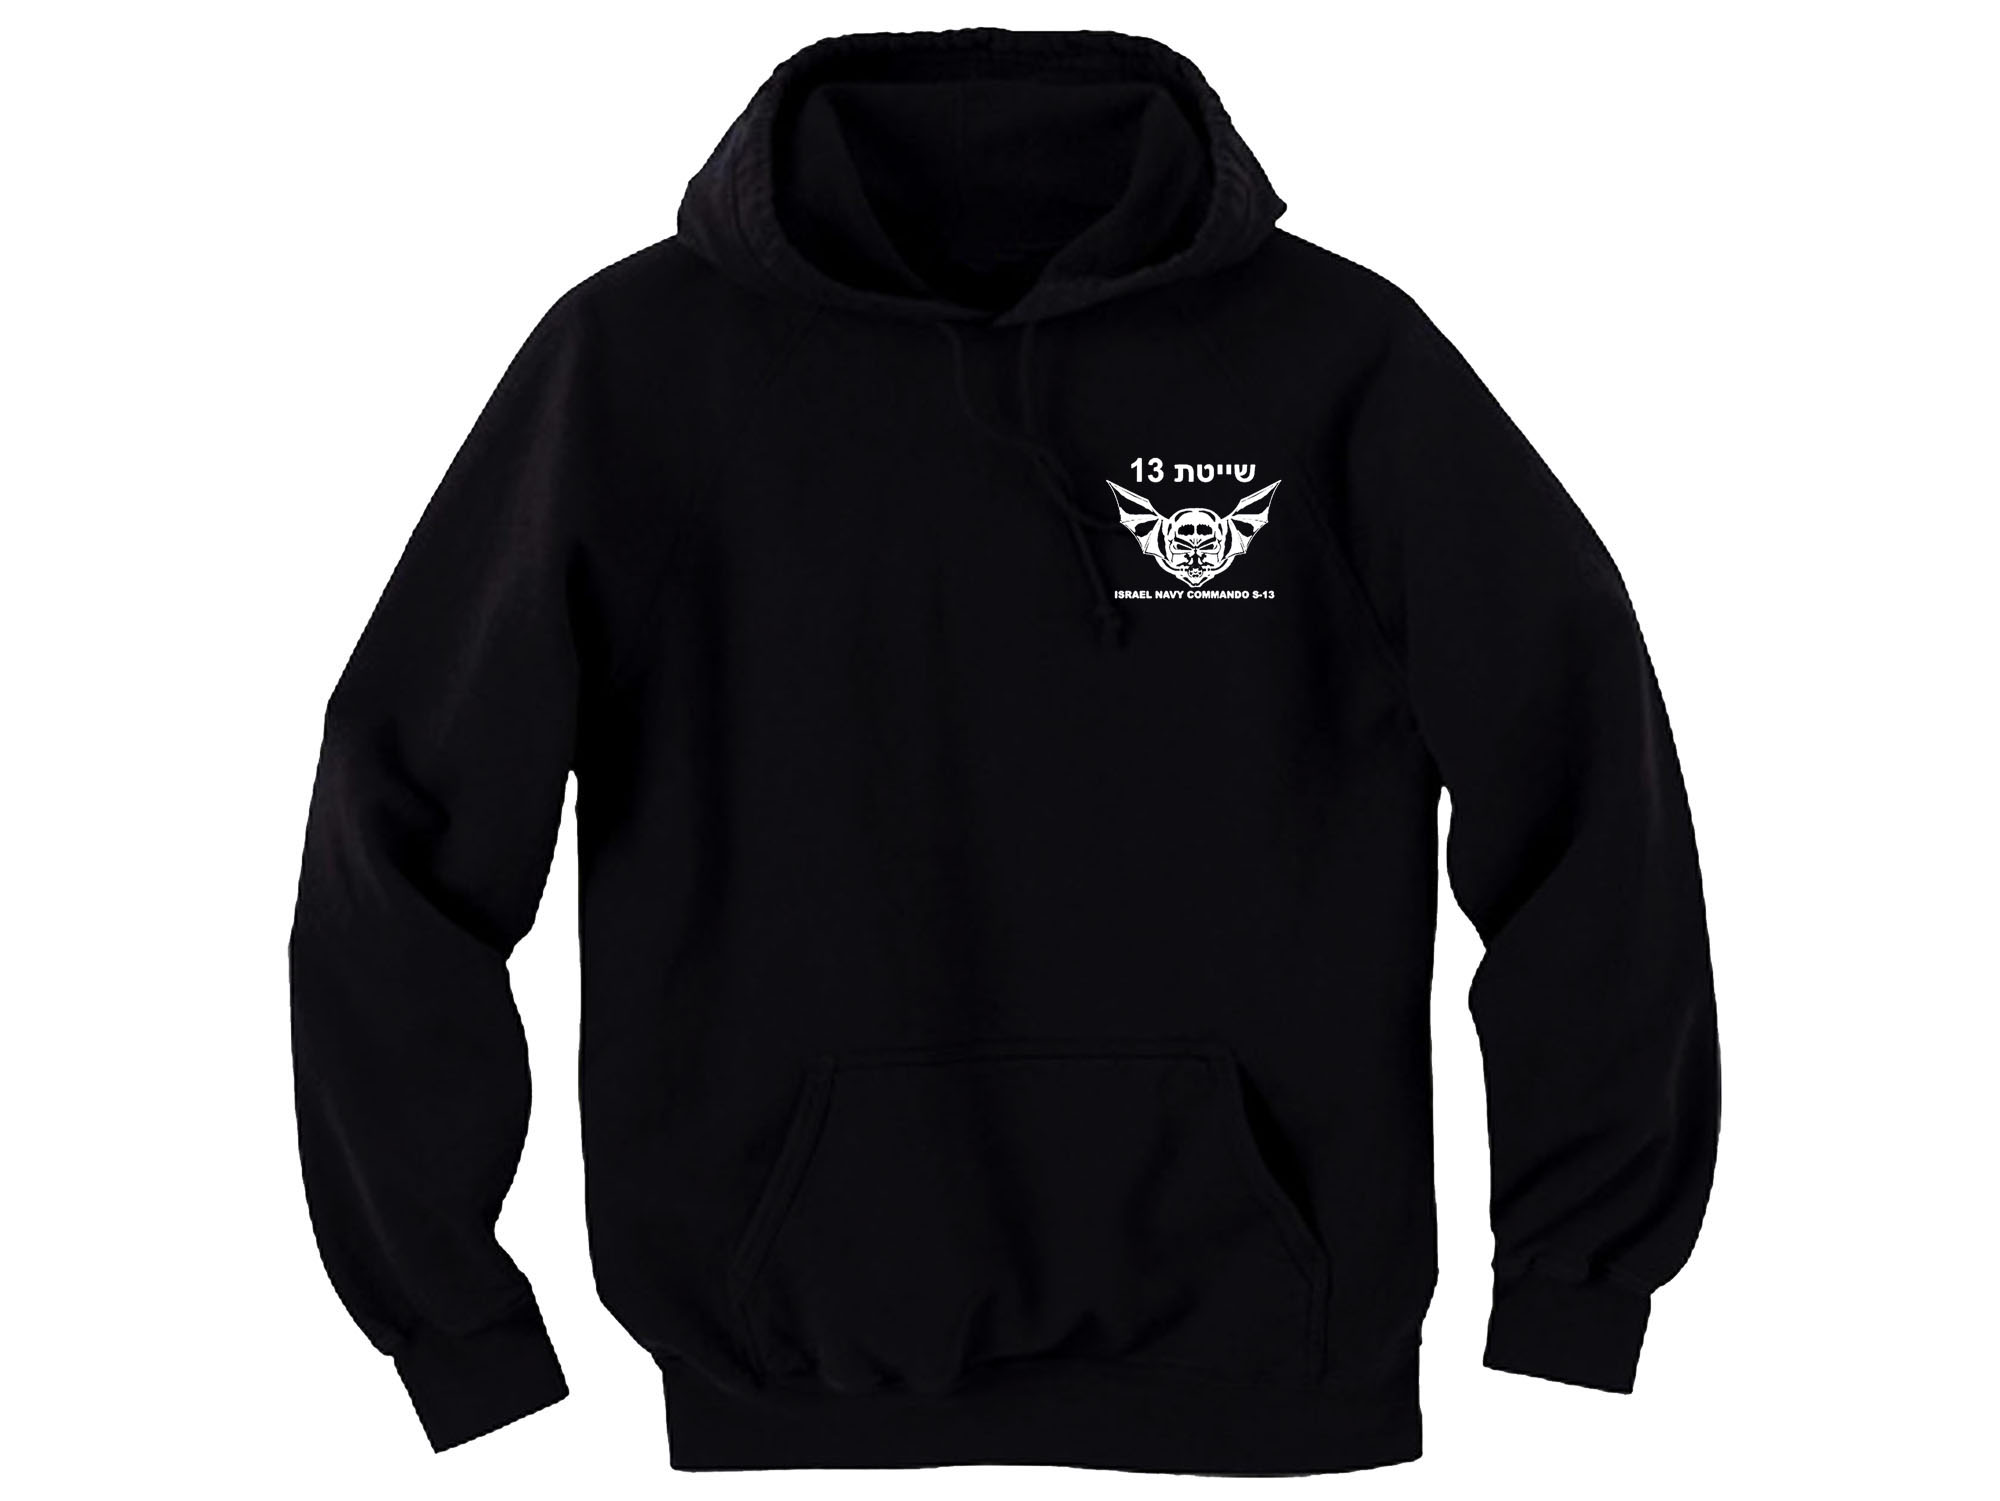 Israel army special force shayetet 13 customized hoodie 2